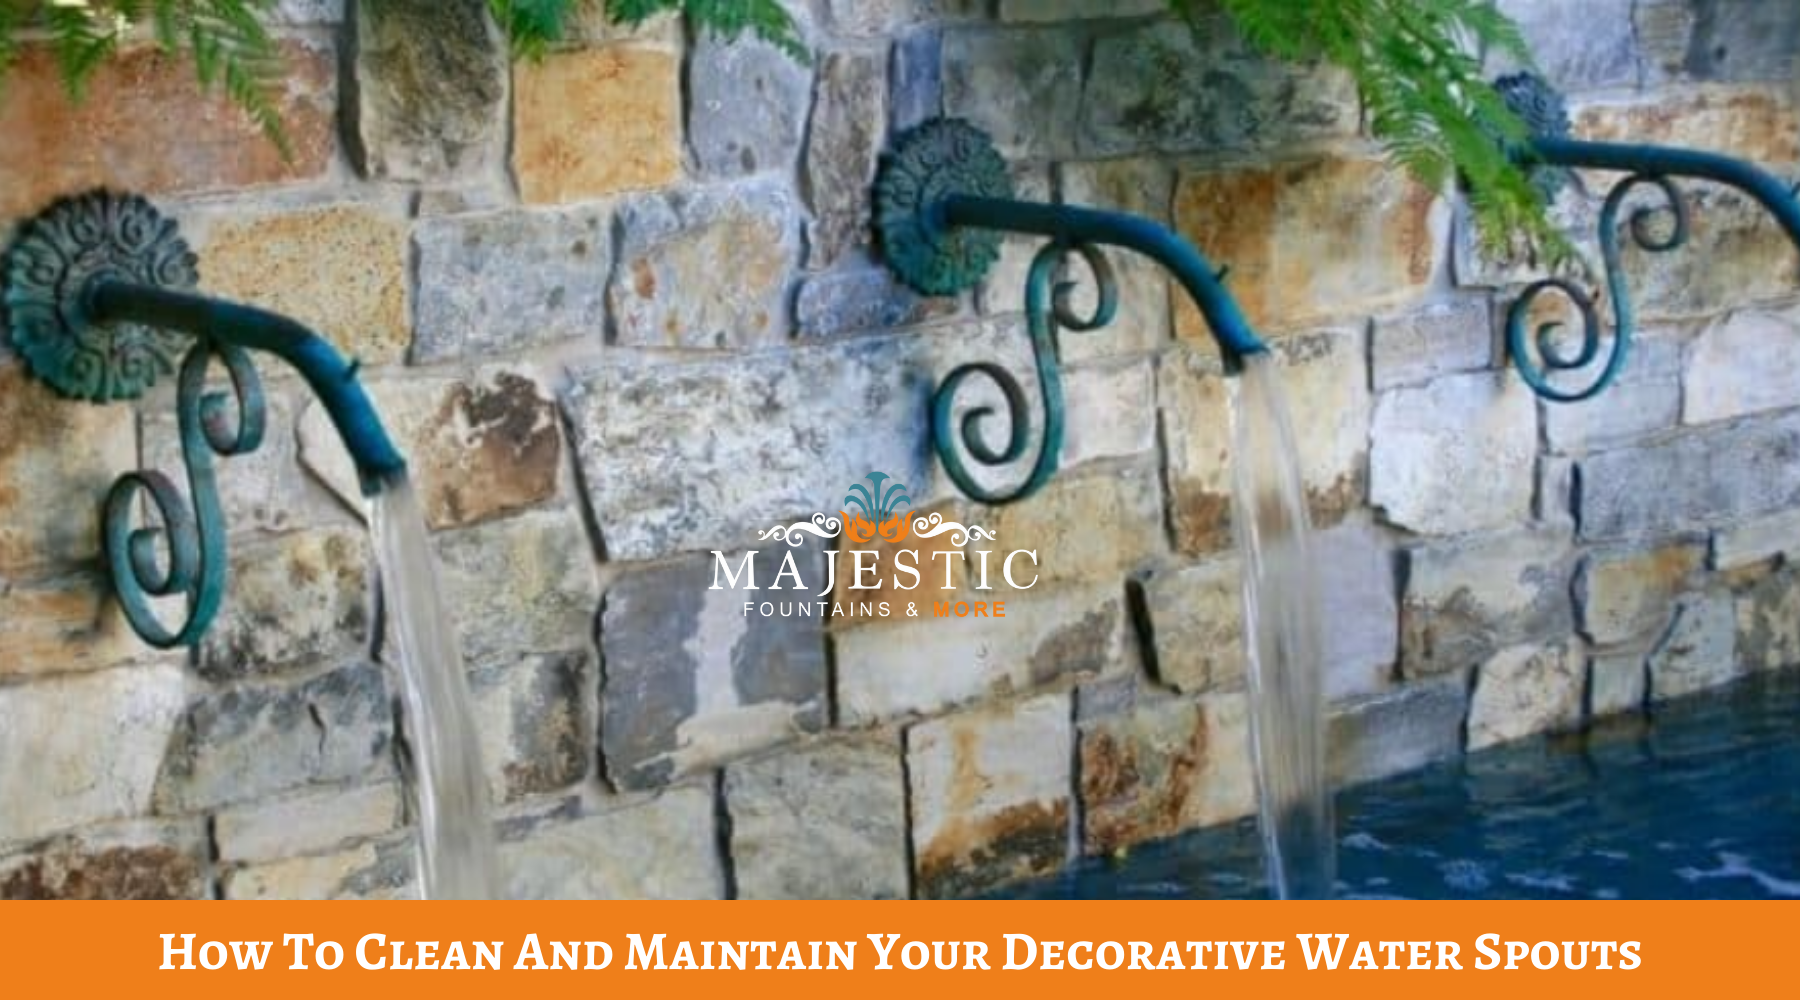 How To Clean And Maintain Your Decorative Water Spouts